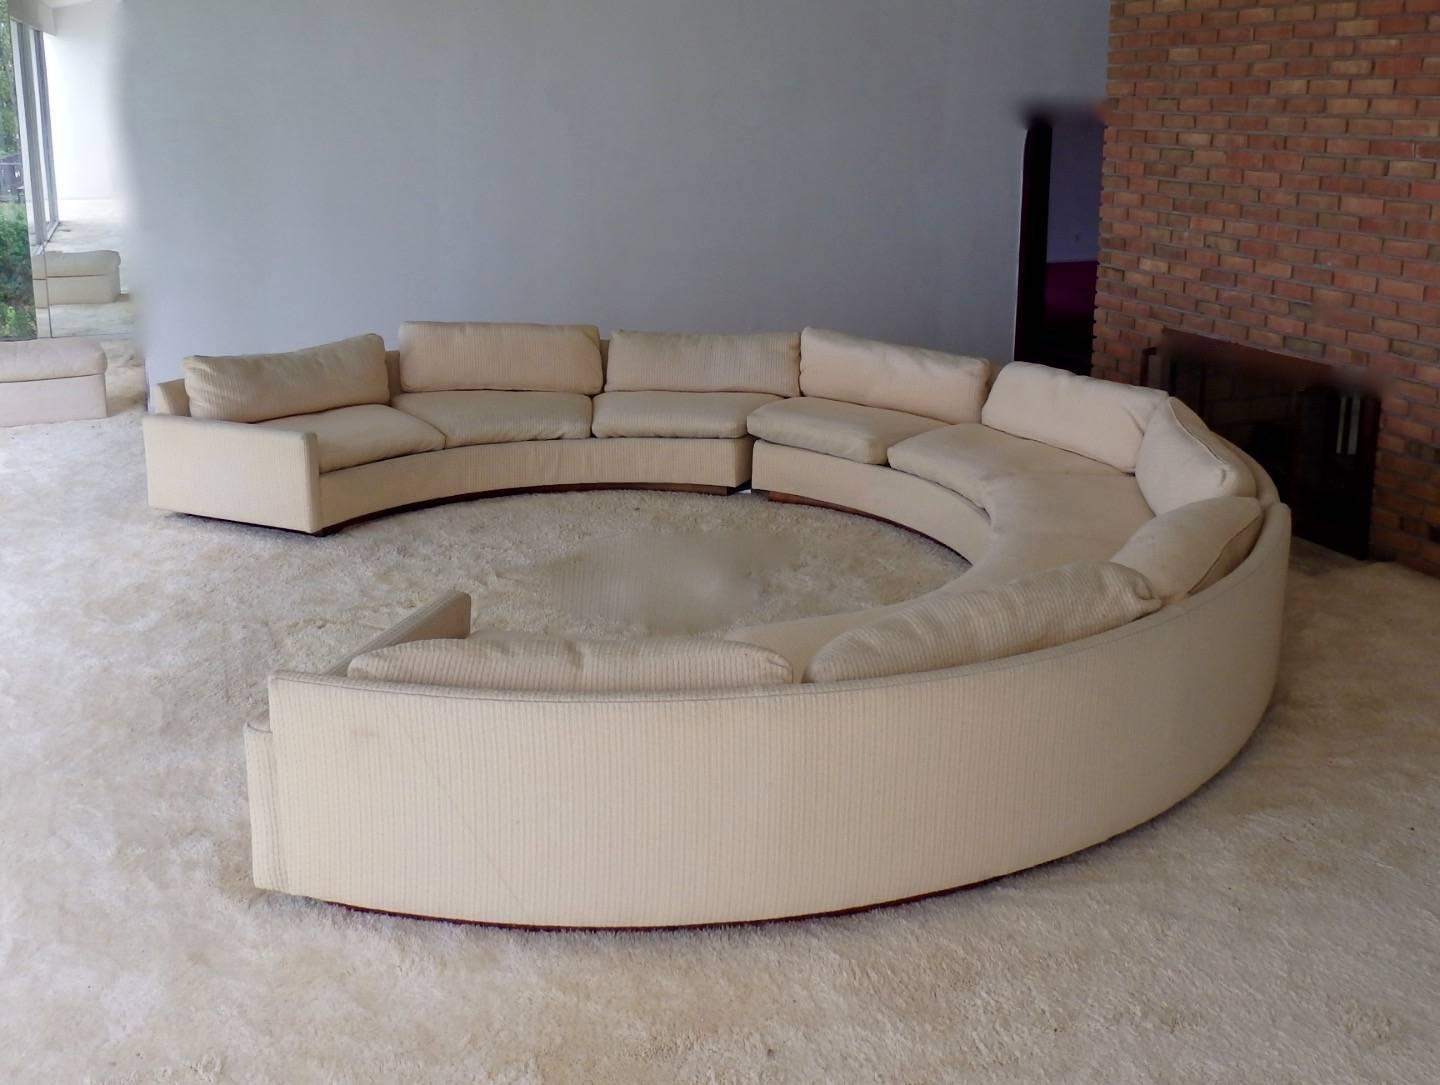 Upholstery Milo Baughman Three-Piece Circle Sectional Couch